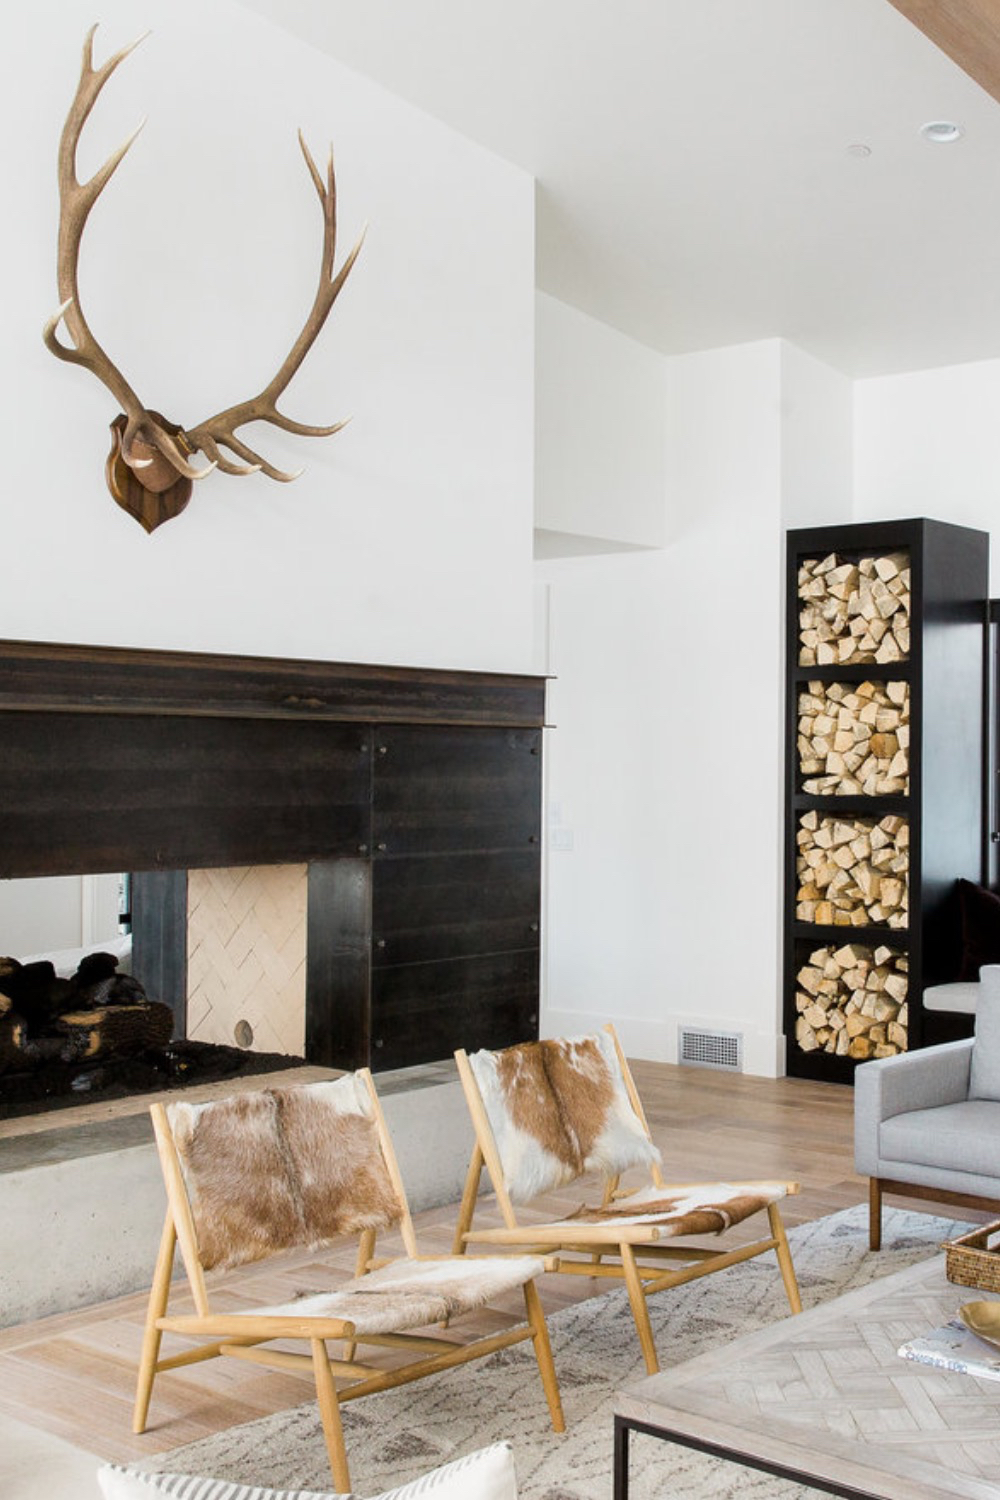 Living room with antlers above fireplace